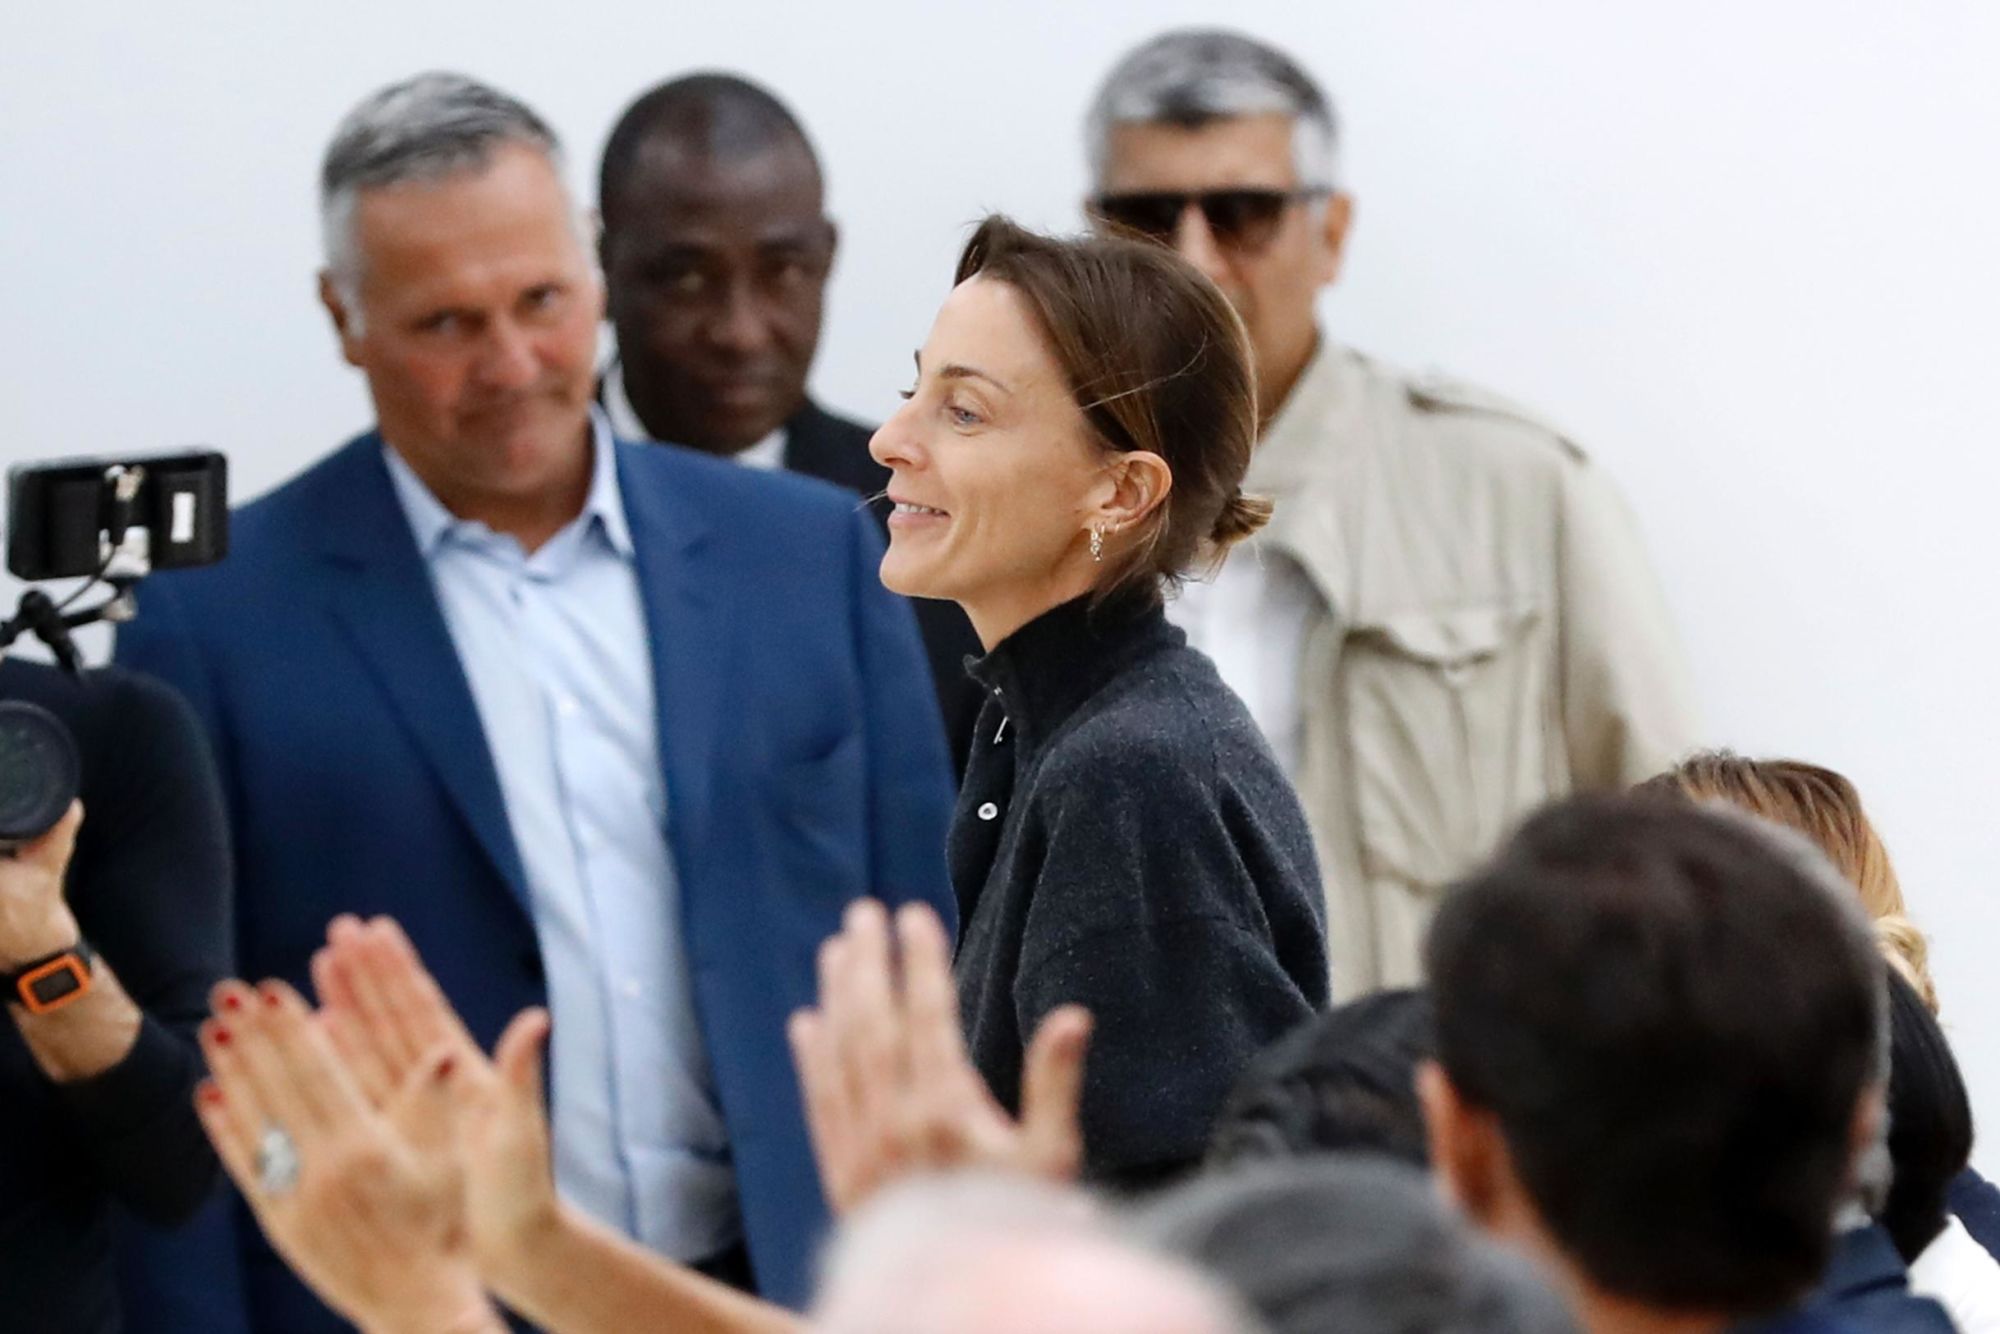 She's back: Phoebe Philo to launch own label with LVMH